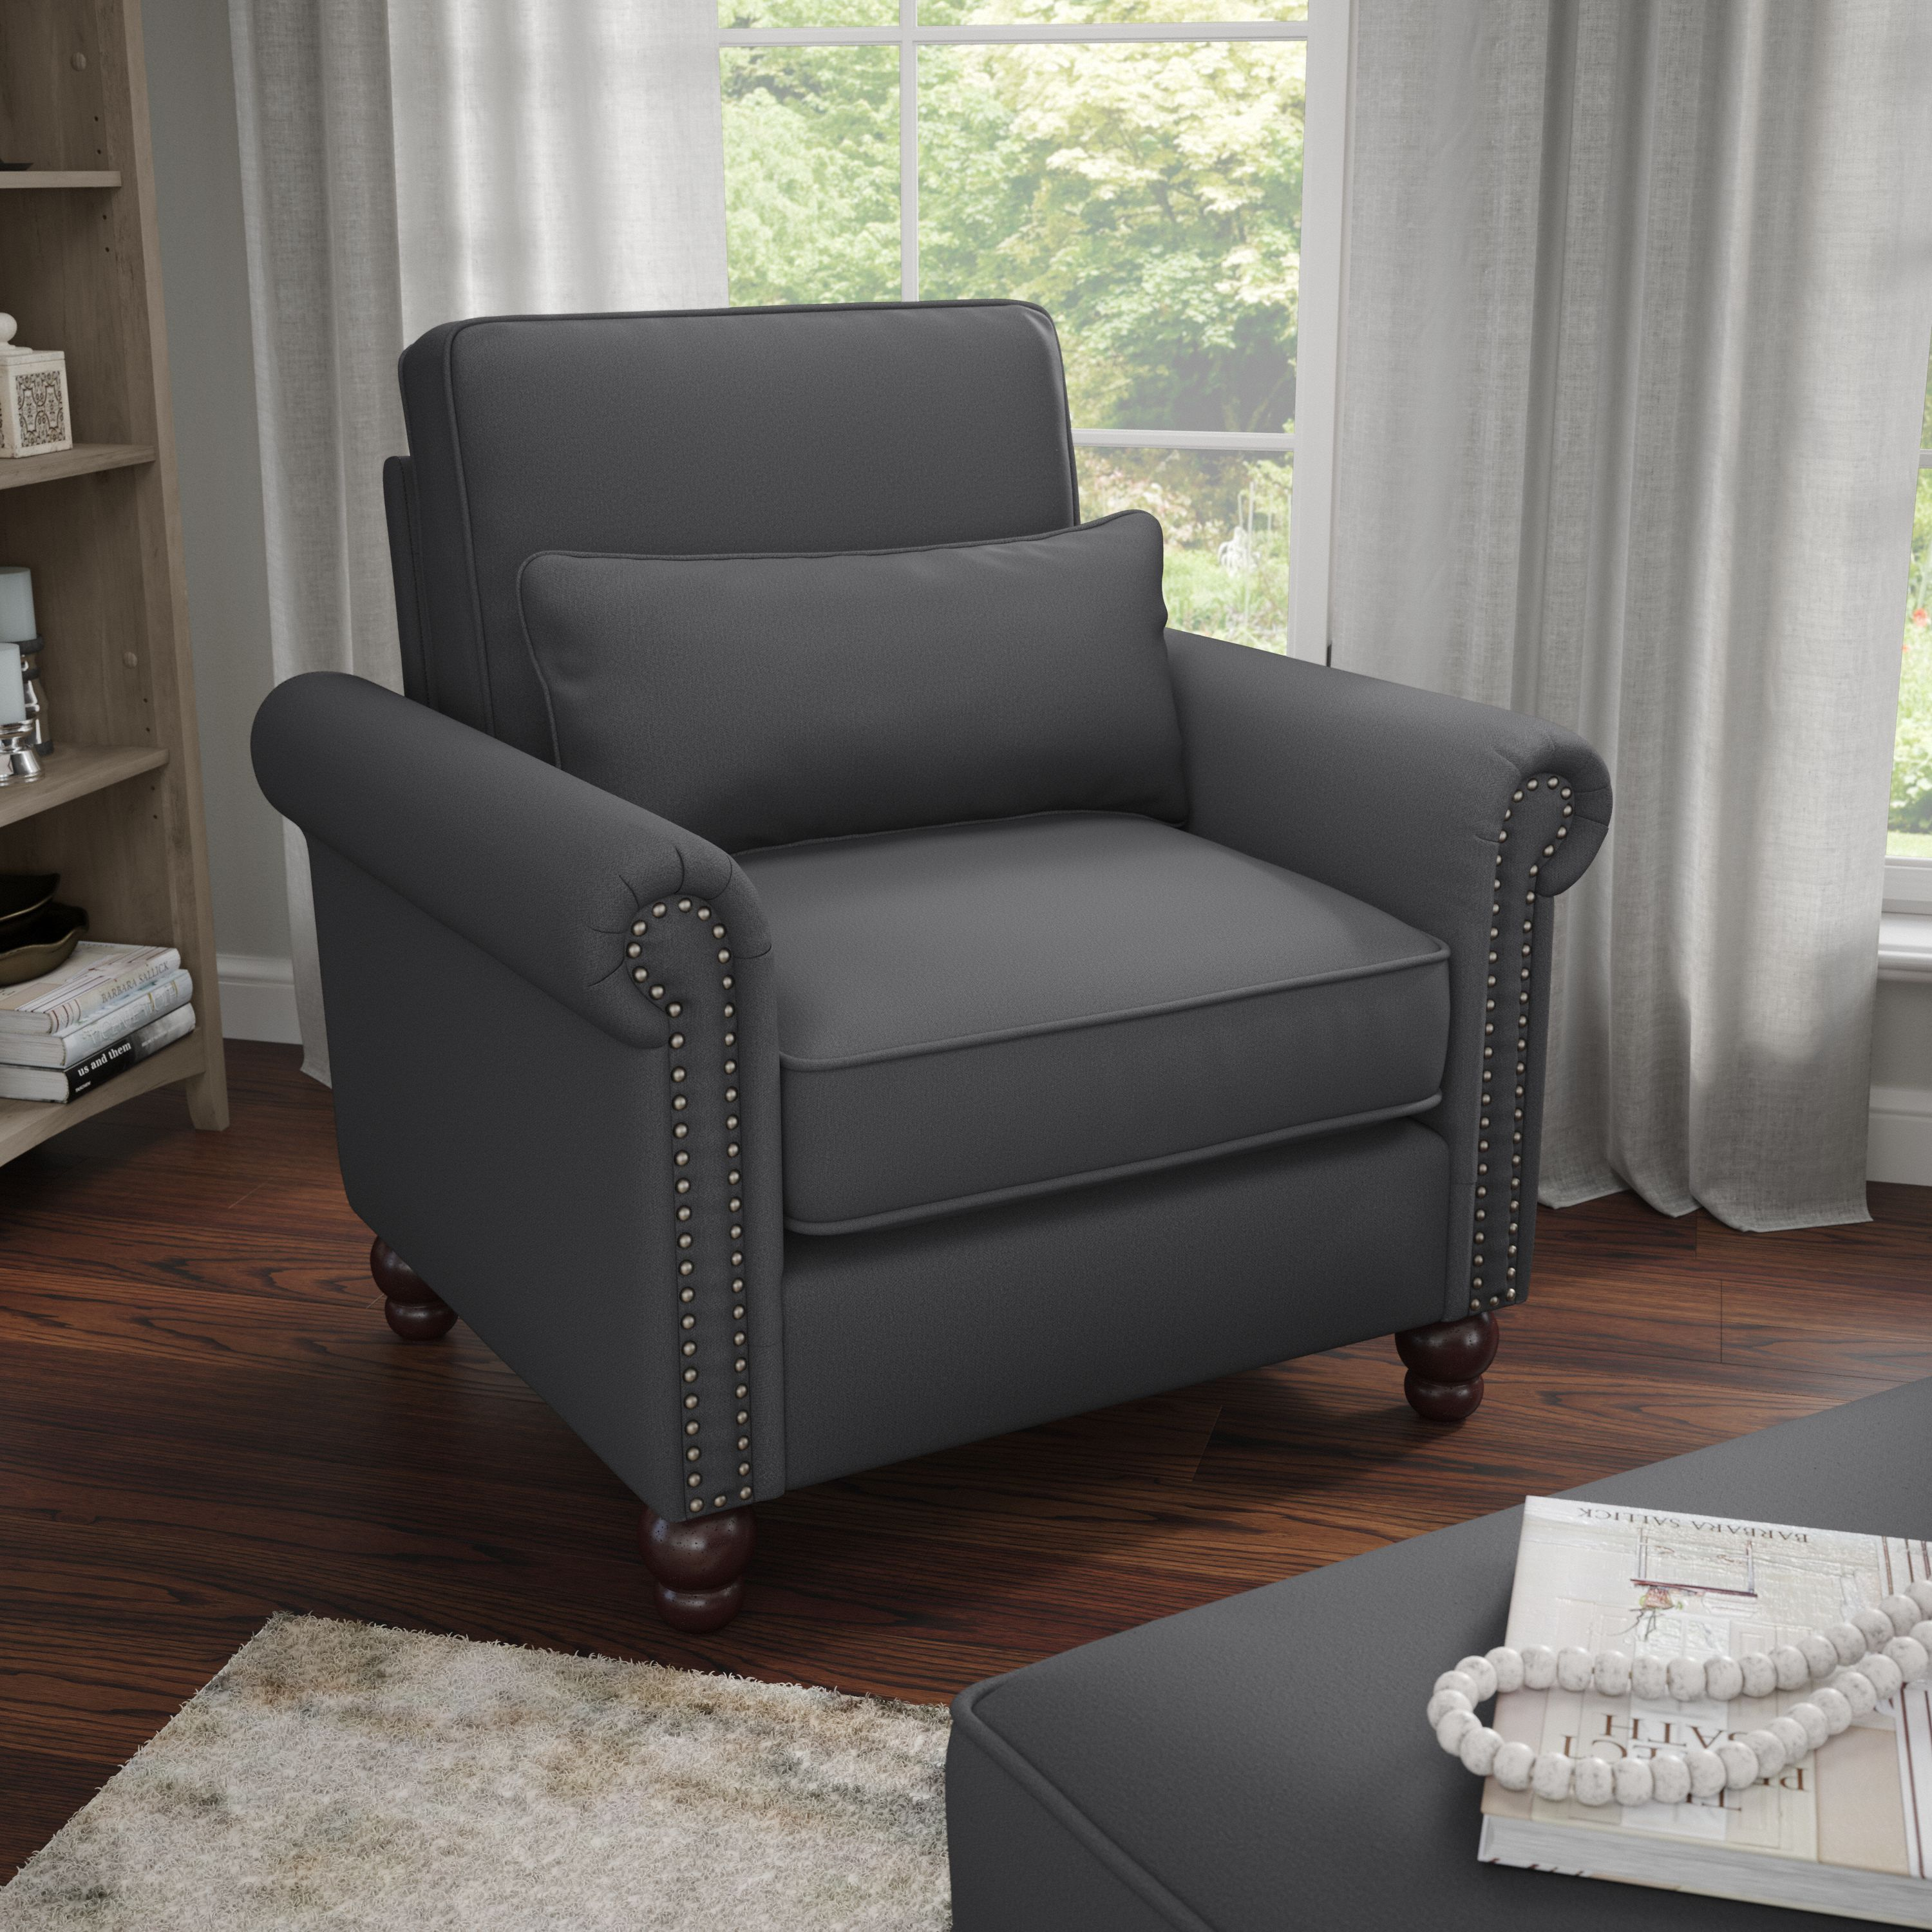 Shop Bush Furniture Coventry Accent Chair with Arms 01 CVK36BCGH-03 #color_charcoal gray herringbone fabr